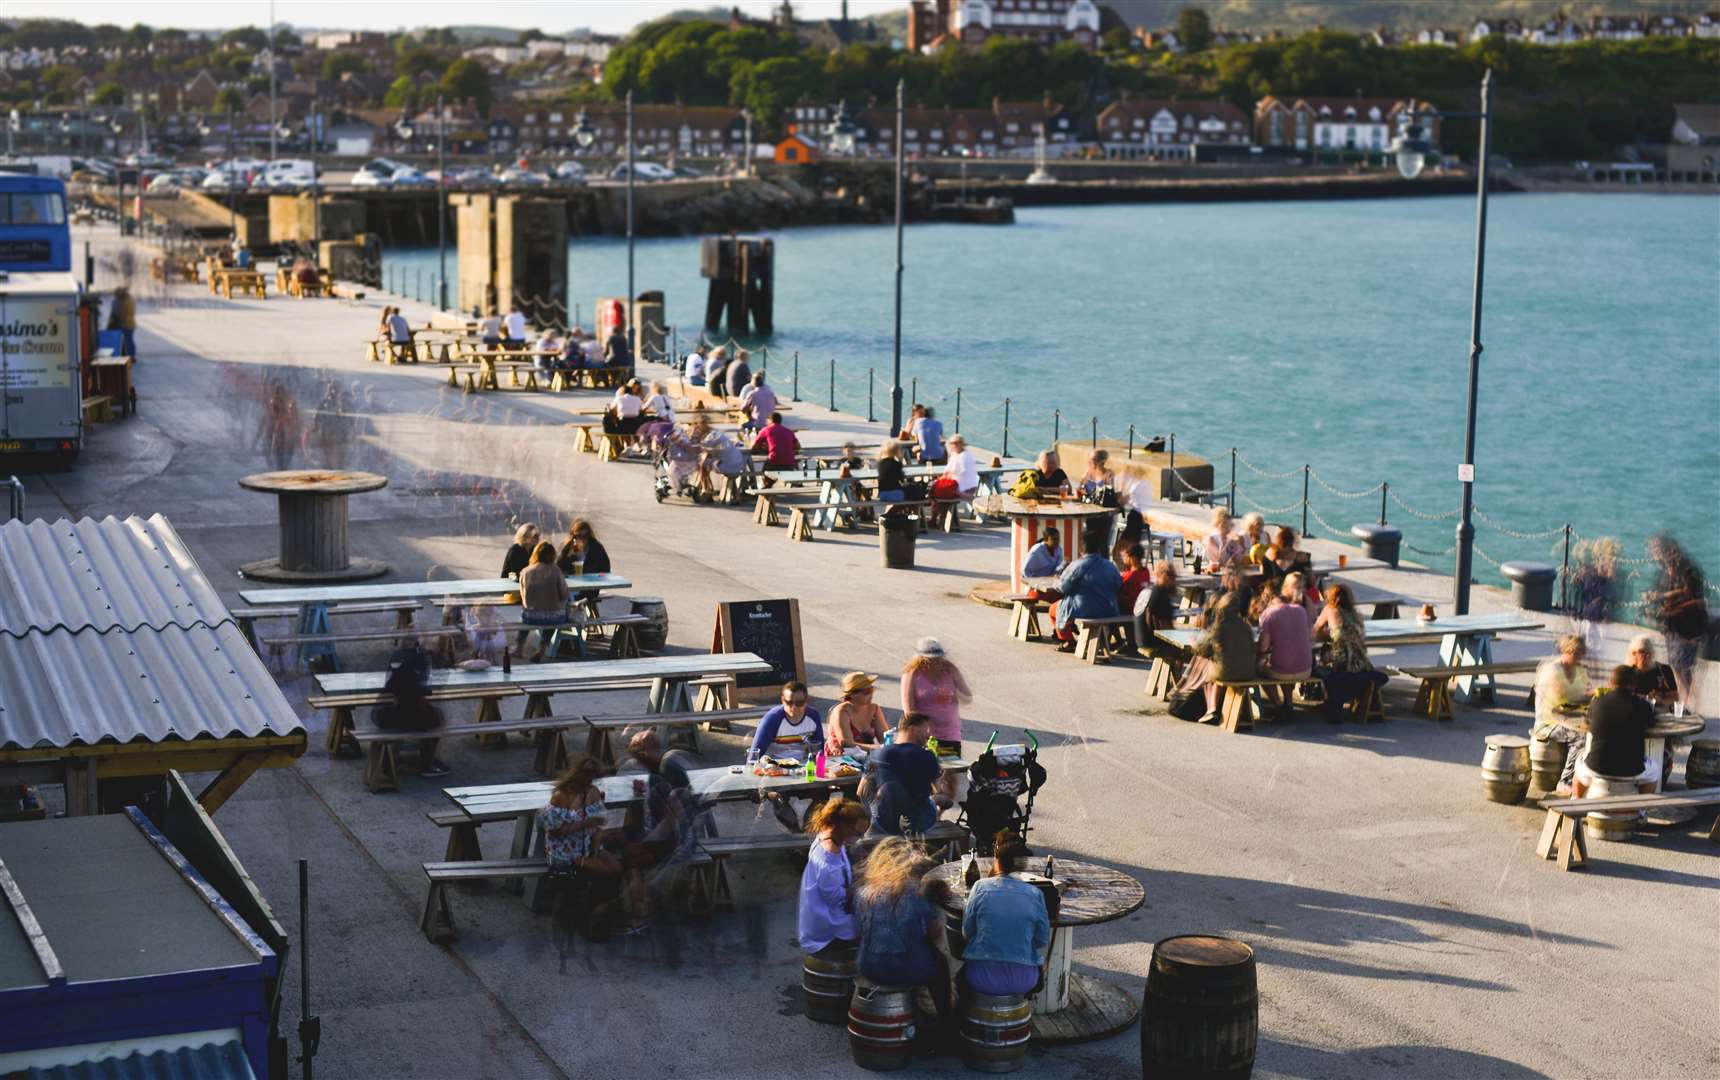 Folkestone Harbour Arm has helped encourage longer stays in the town